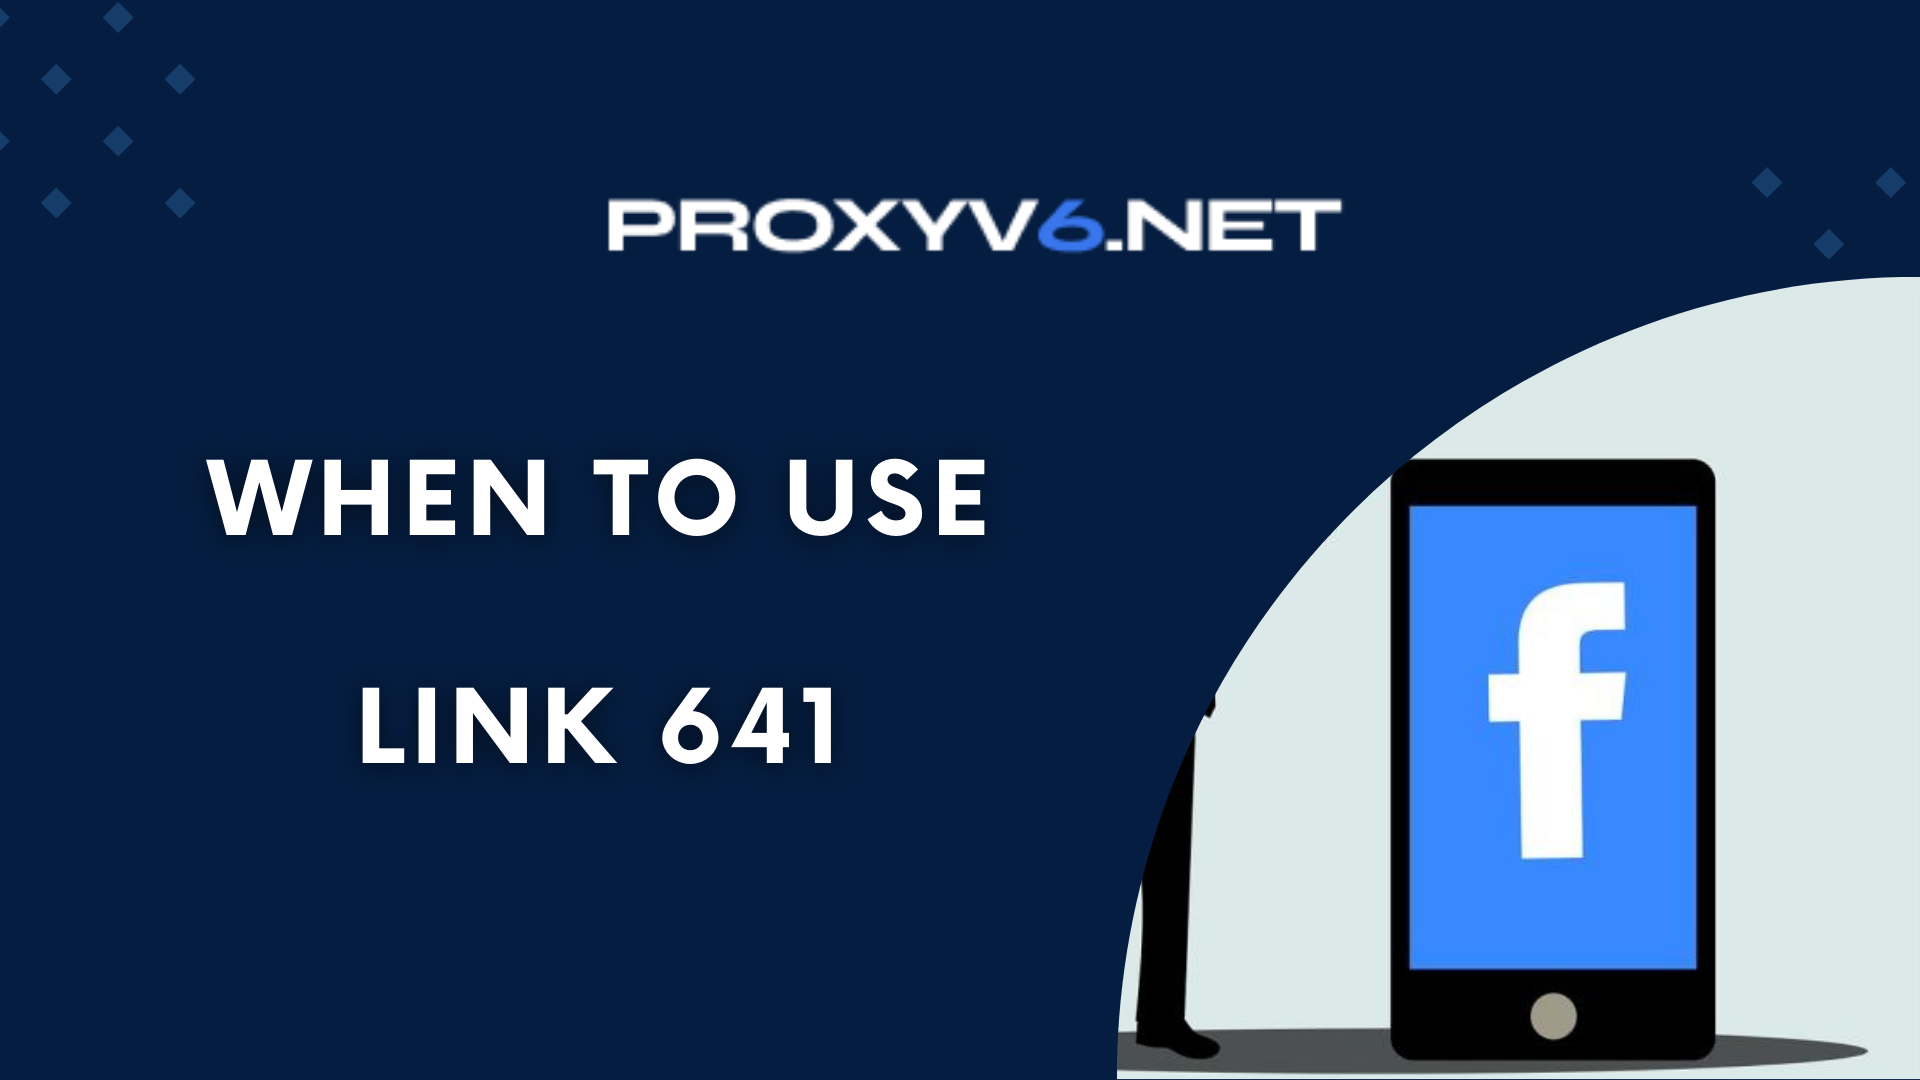 When to use Link 641